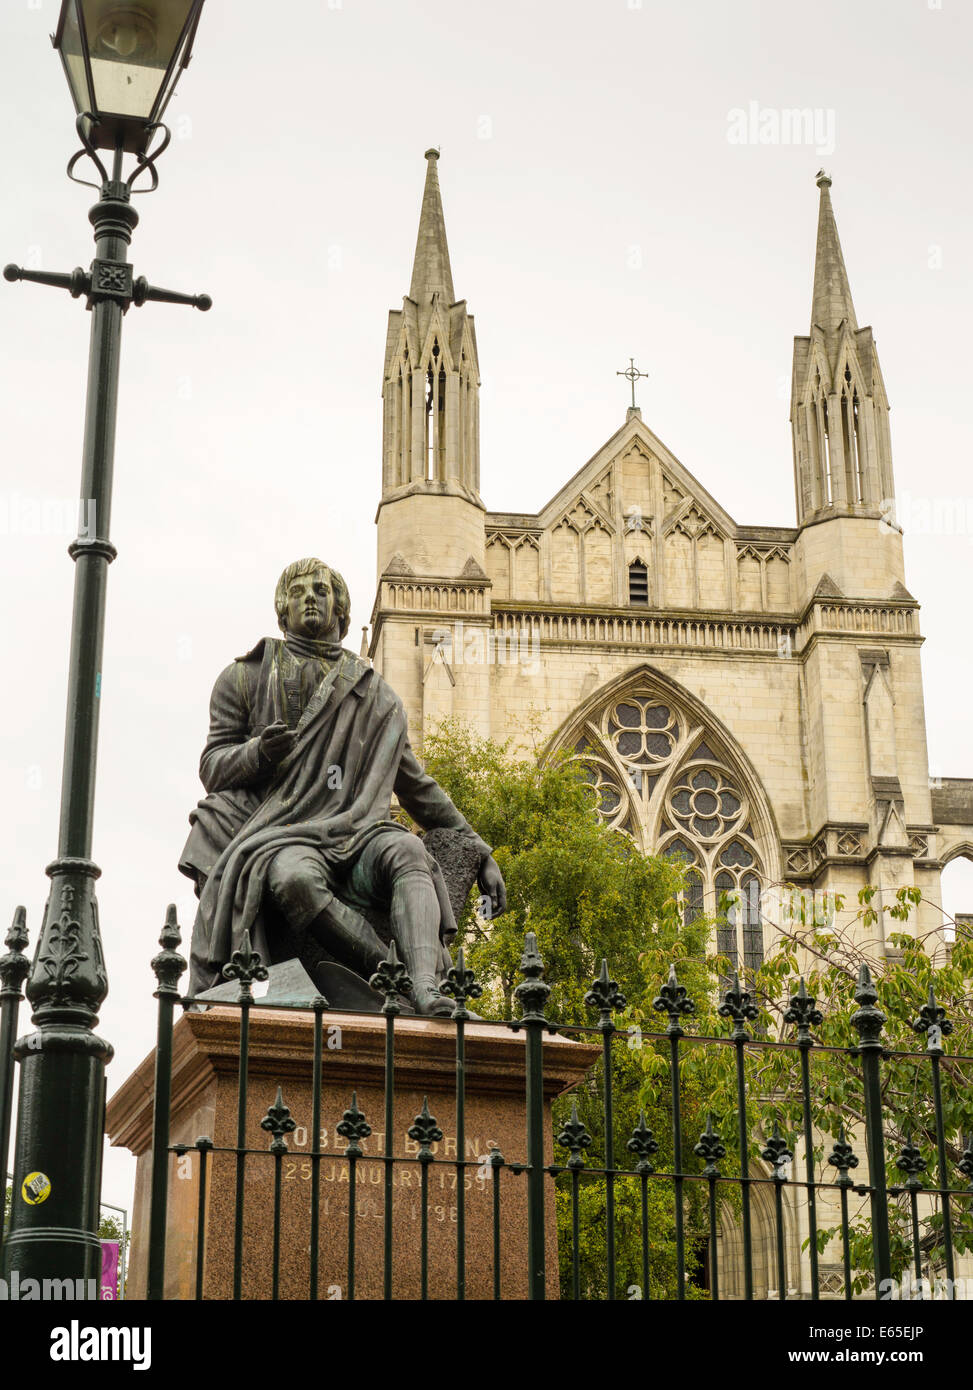 A low-angle view of the Robert Burns statue and St. Paul's Cathedral, from the Octagon, Dunedin, New Zealand Stock Photo